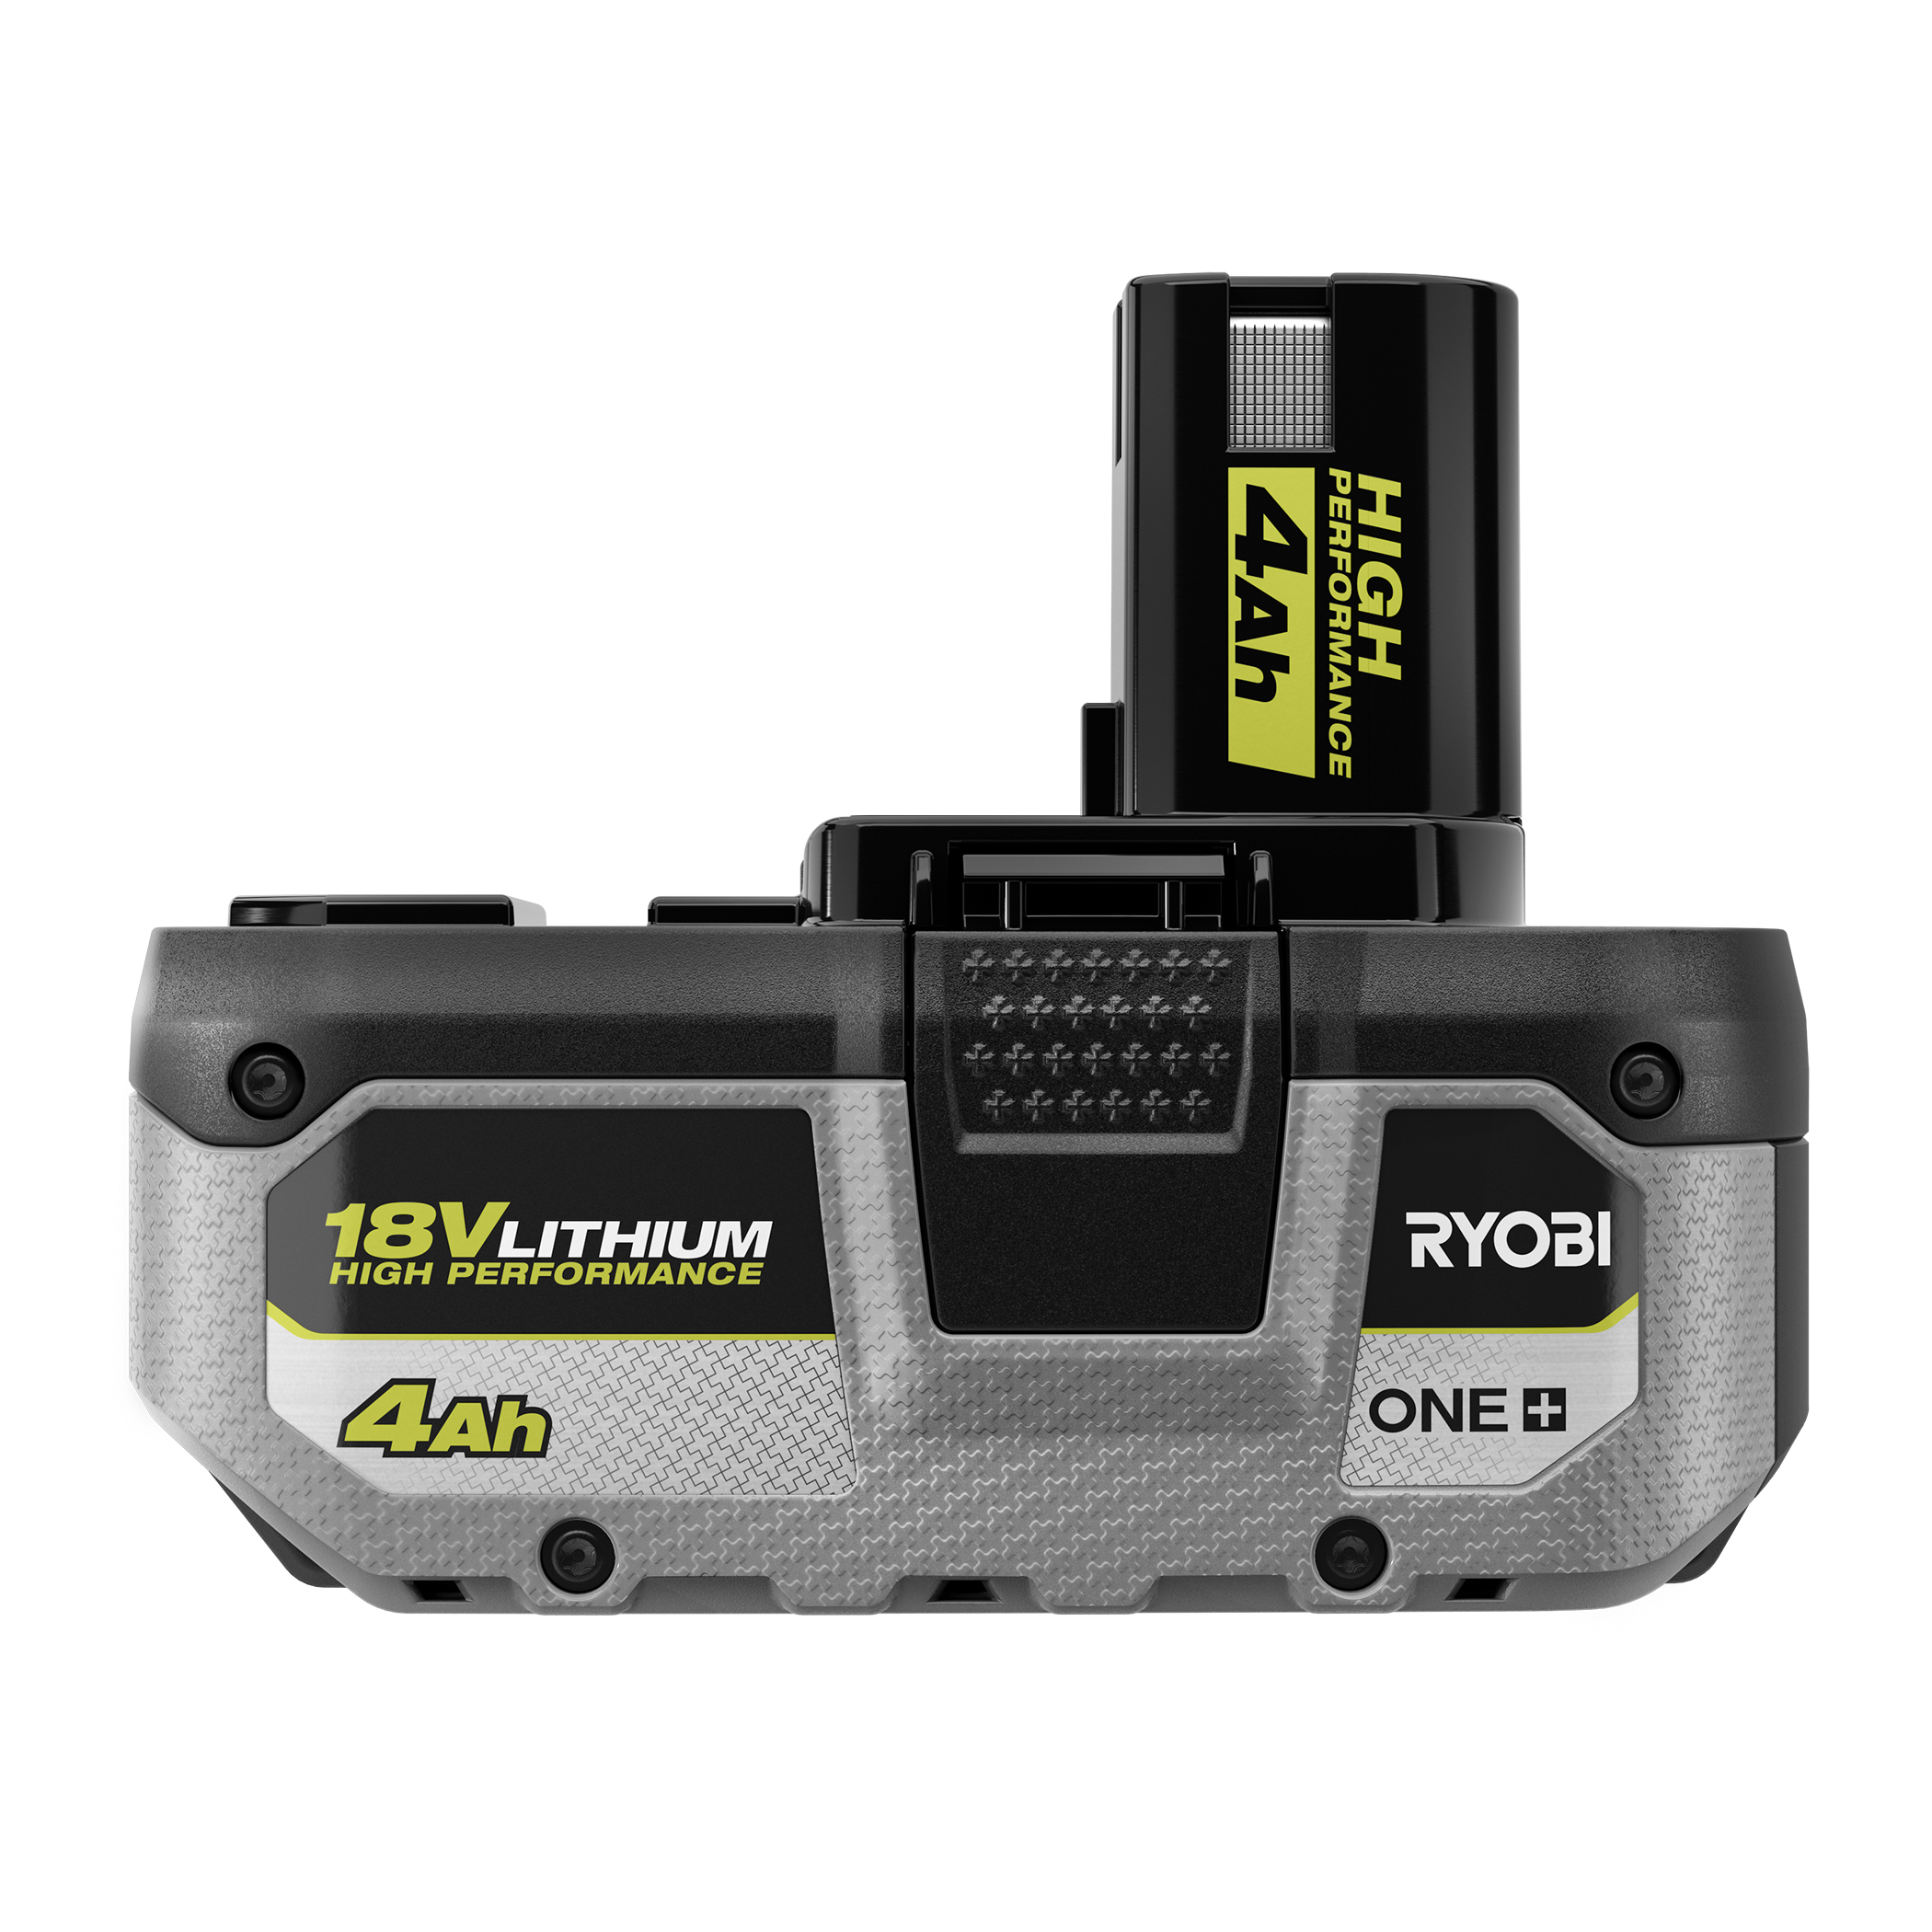 RYOBI PSK006 18V ONE+ Lithium-Ion 4.0 Ah Battery (2-Pack) and